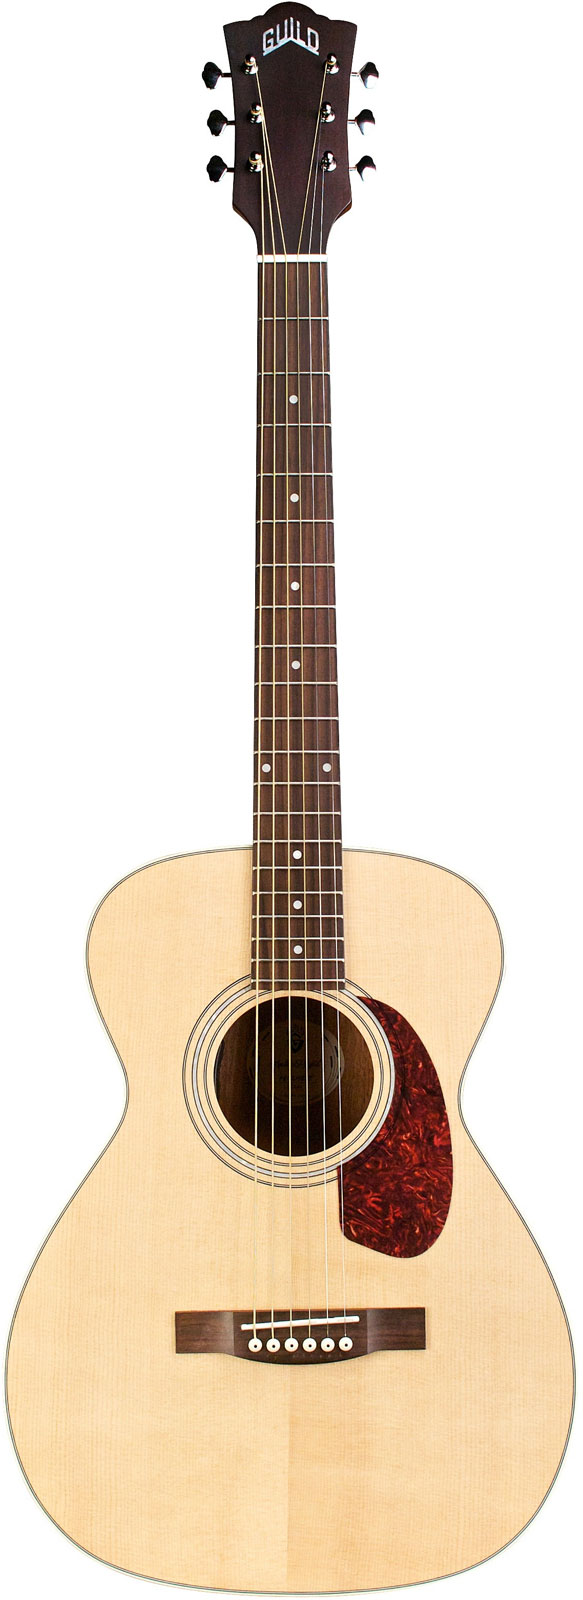 GUILD WESTERLY M240E NATURAL